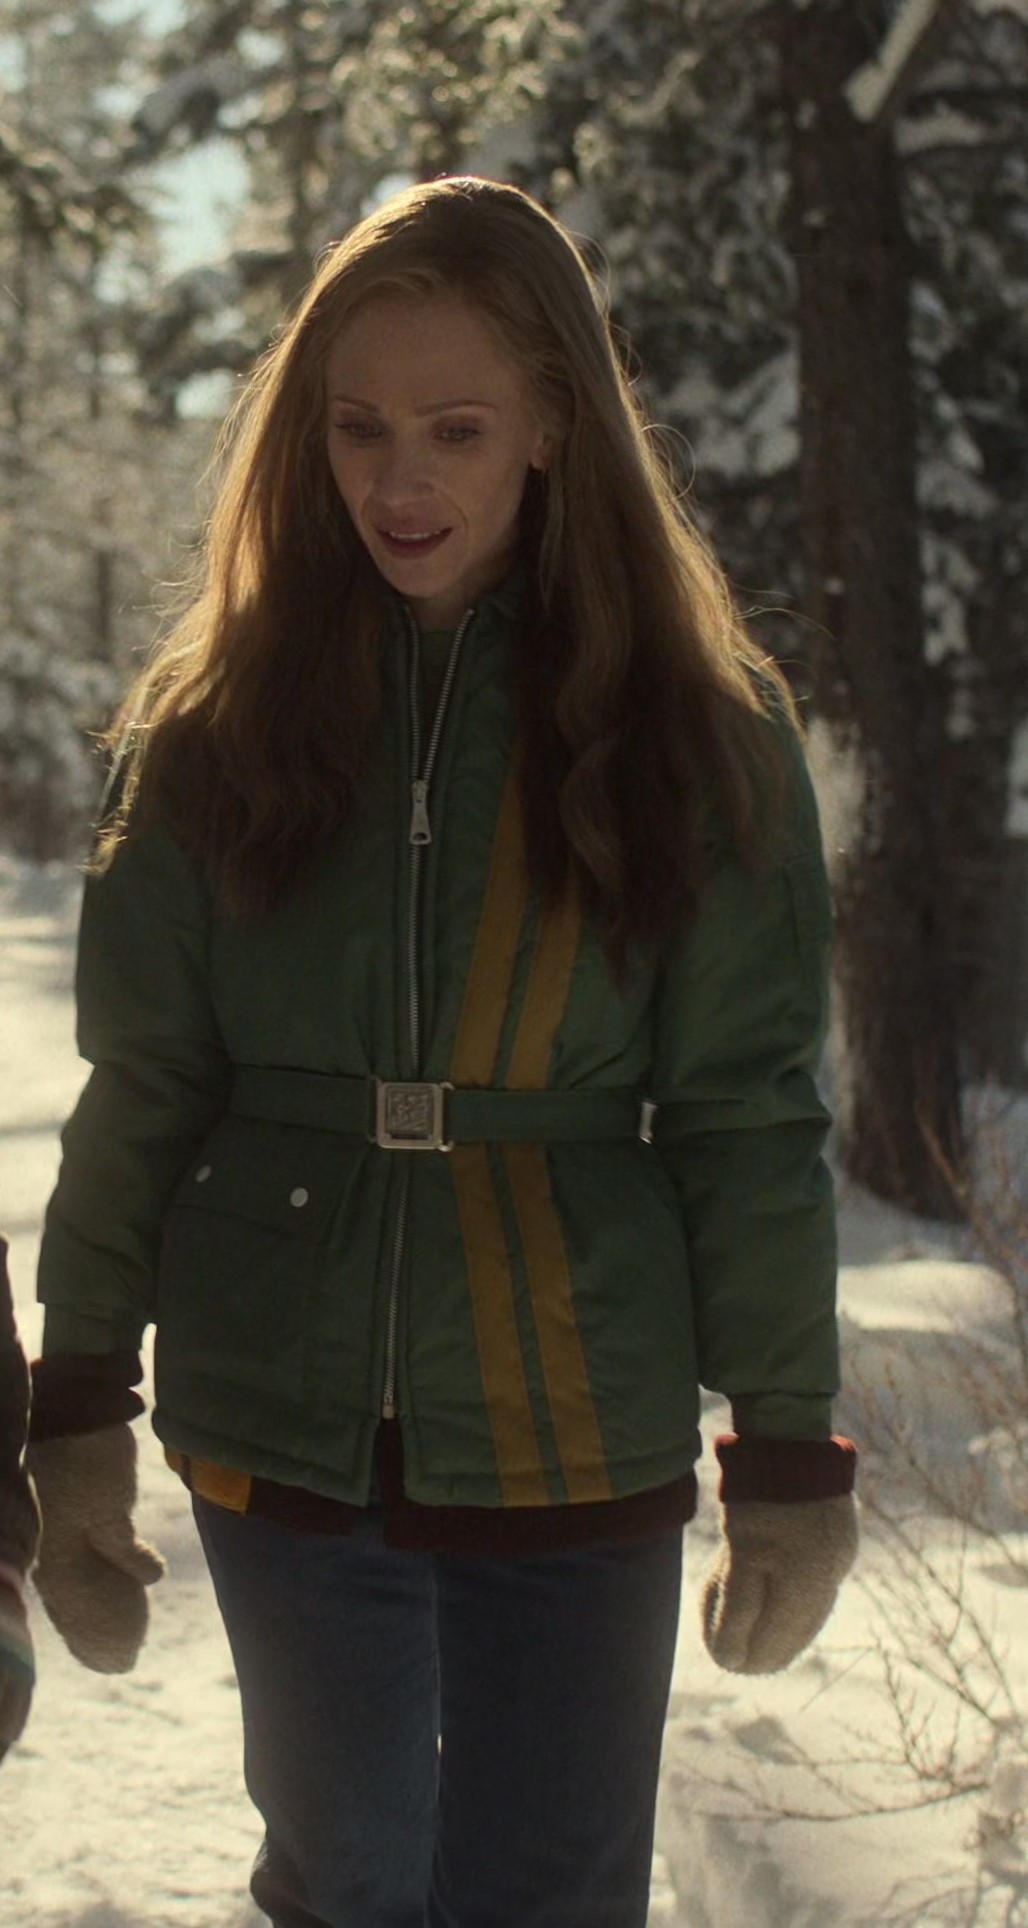 Worn on Fargo TV Show - Winter Belted Jacket with Color Block Stripes Worn by Juno Temple as Dorothy "Dot" Lyon / Nadine Bump